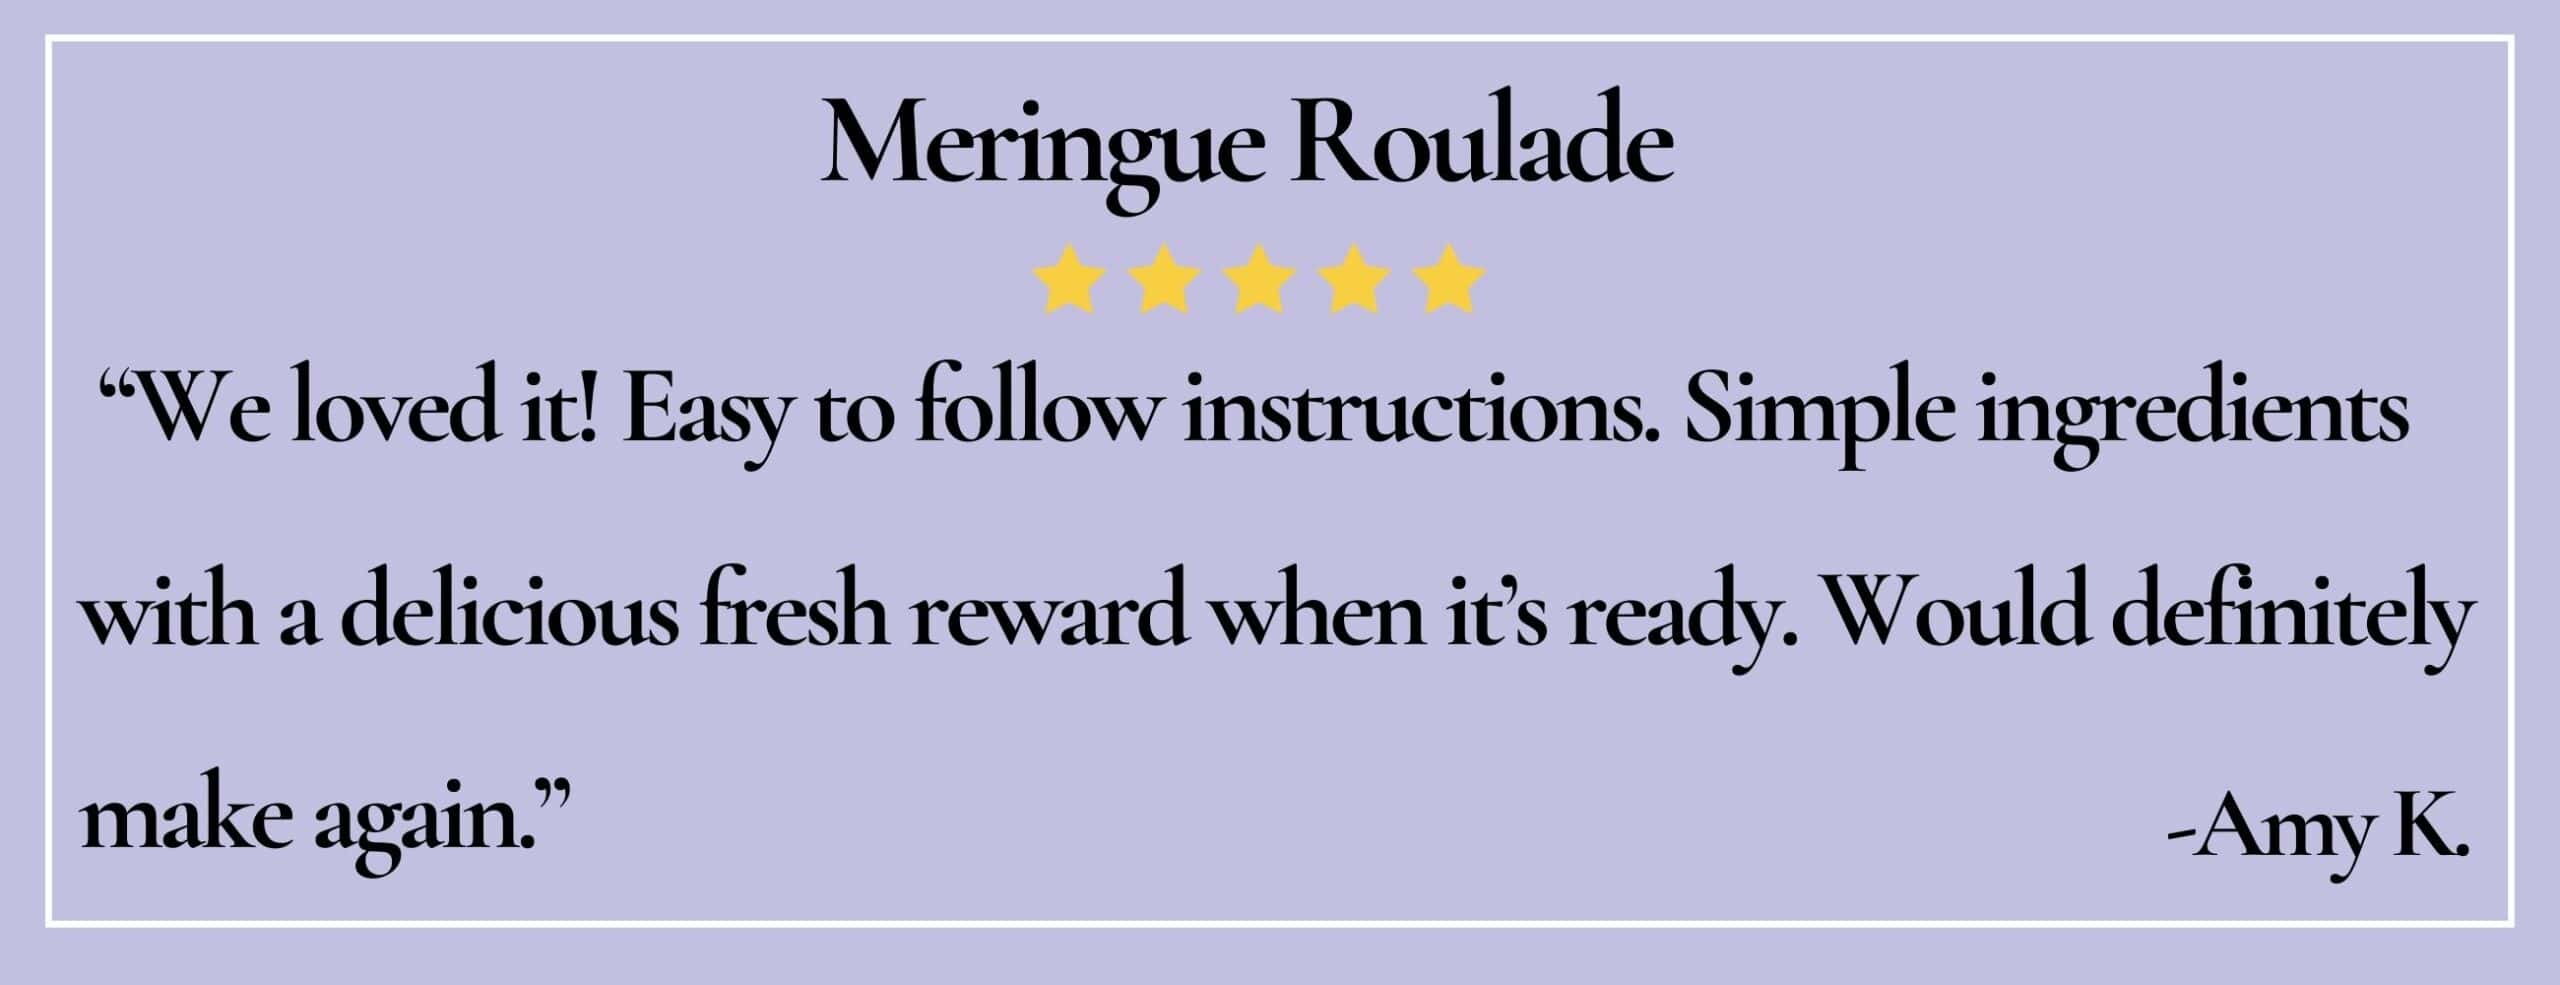 text box with paraphrase: Meringue Roulade- Simple ingredients with a delicious fresh reward. -Amy K.